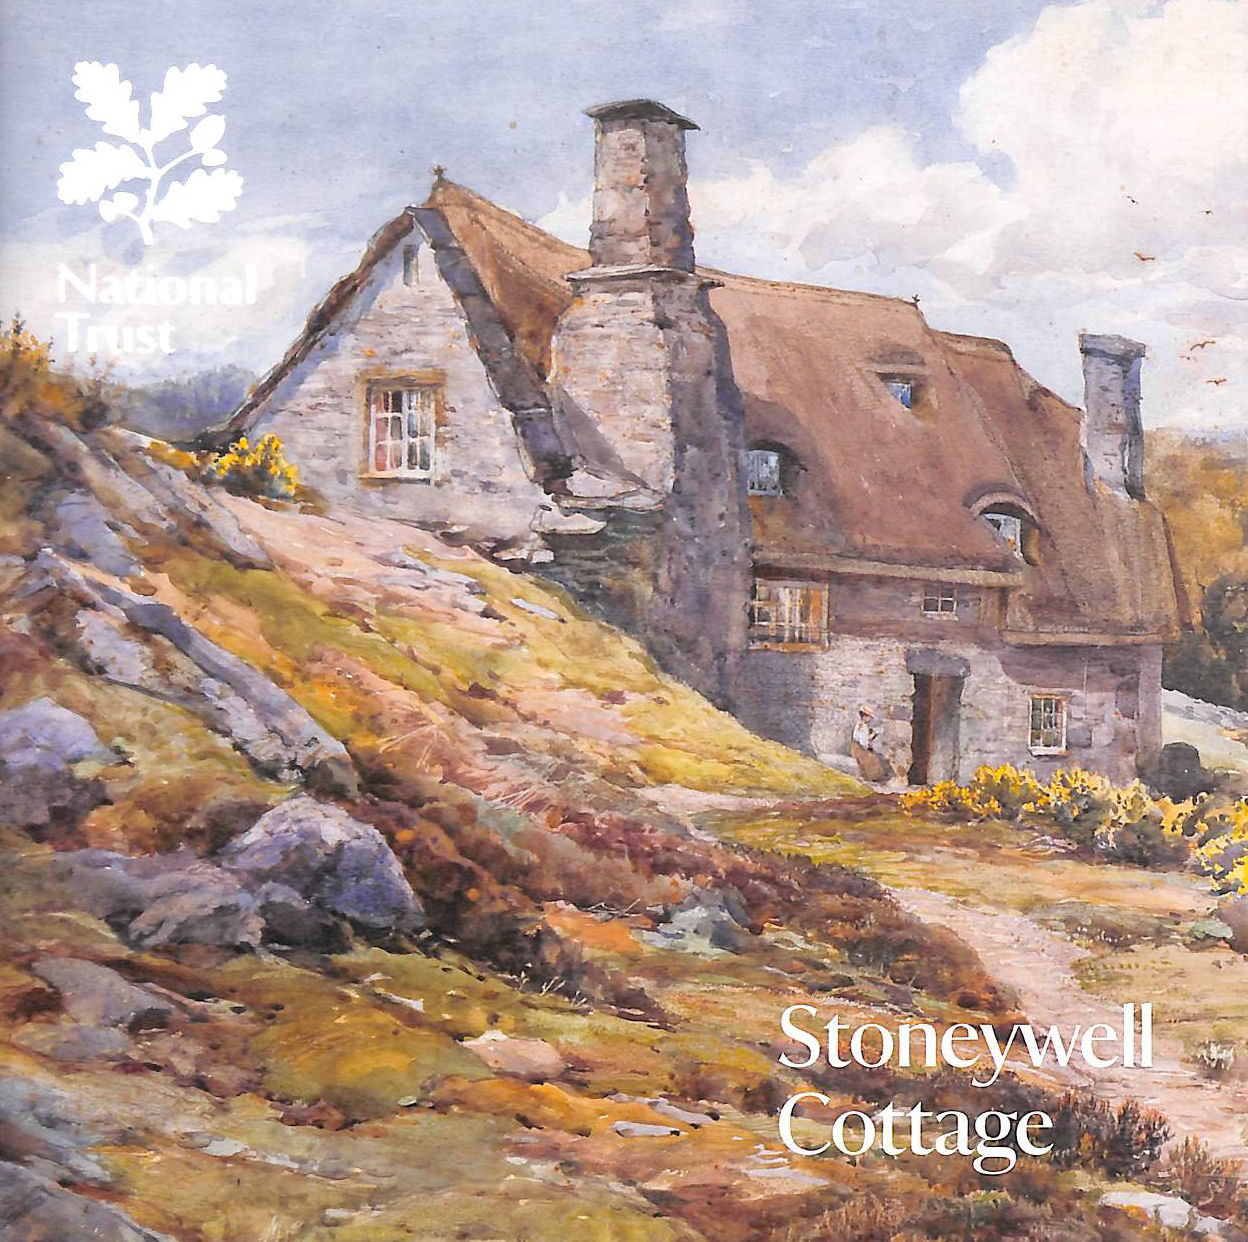  - Stoneywell Cottage, Leicestershire